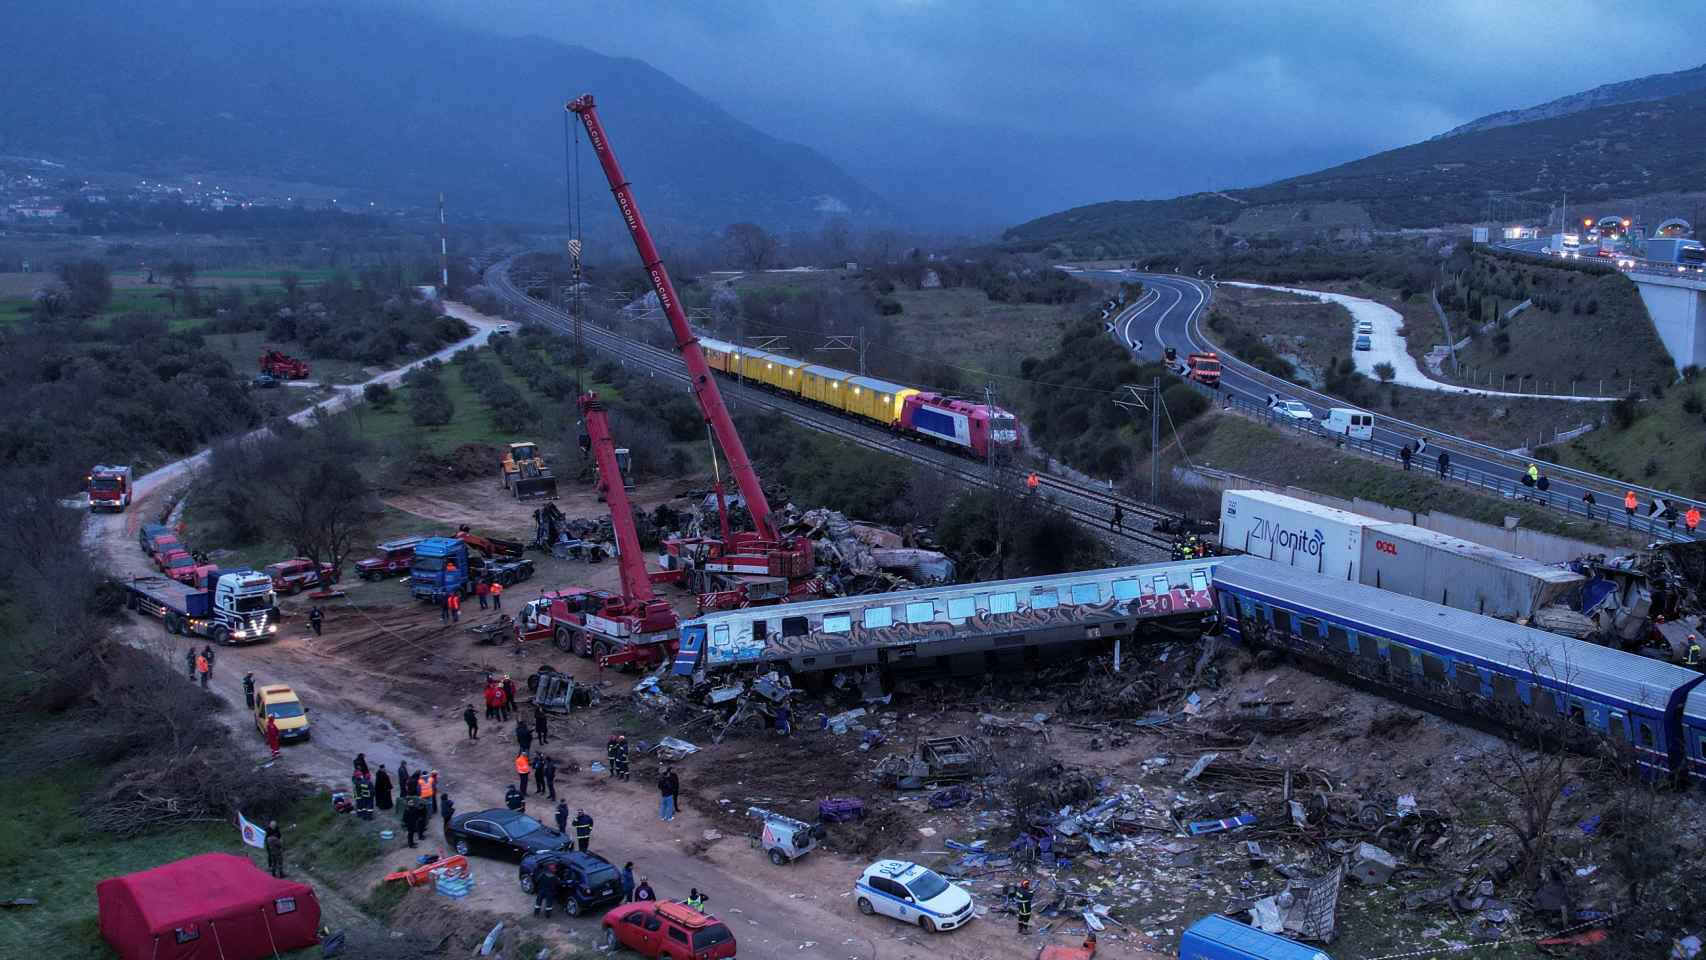 The head of the train station confesses to being responsible for the mistake that caused the fatal accident